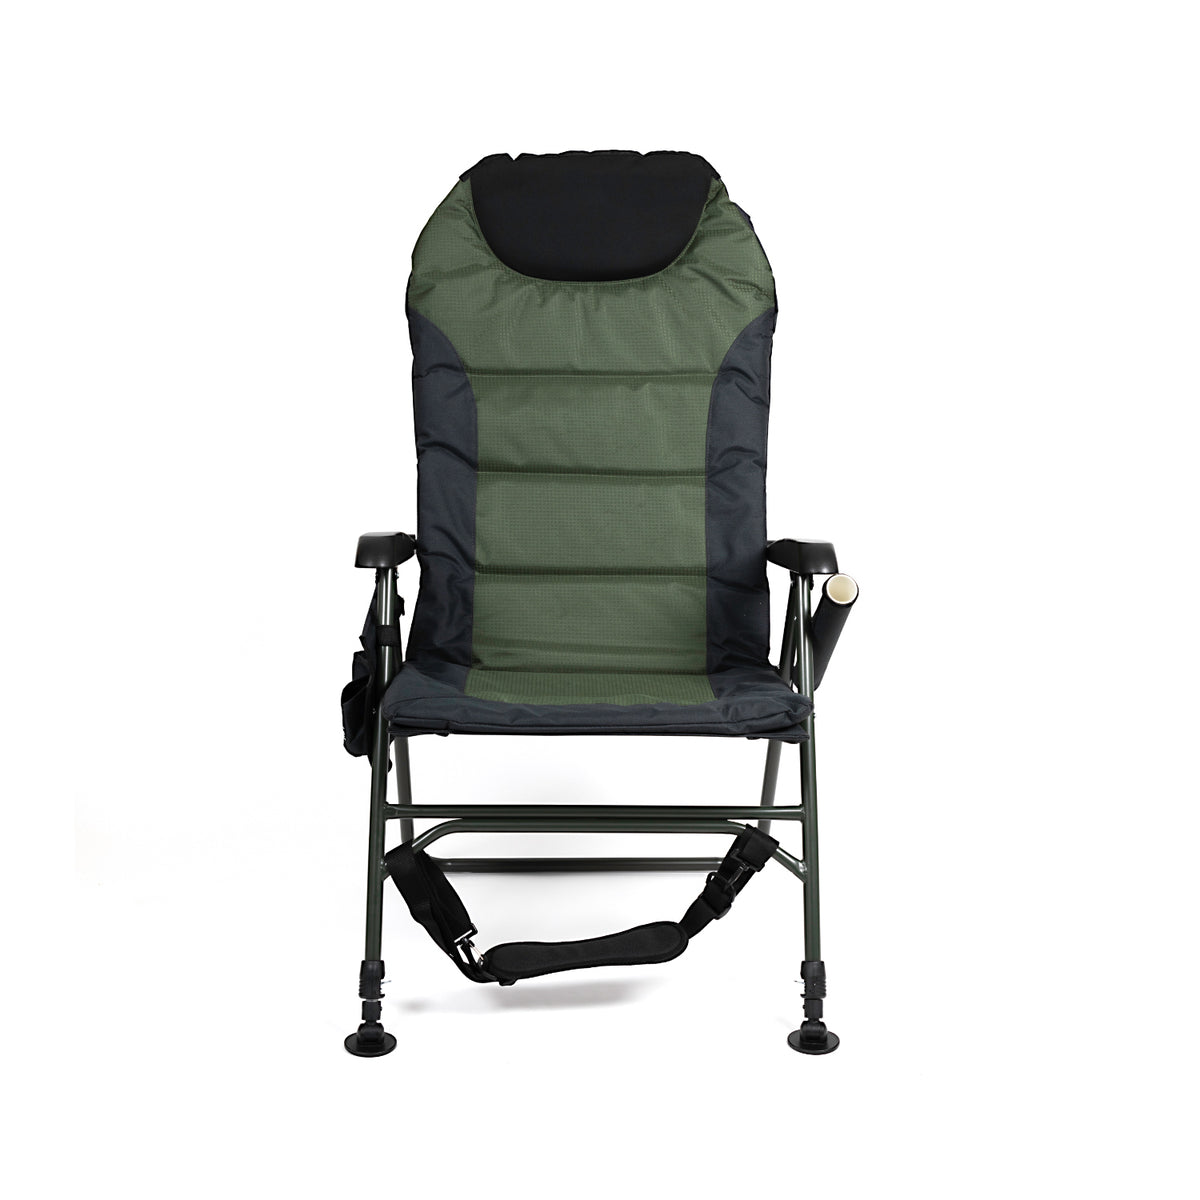 Ultimate 4 Position Outdoor Fishing Chair